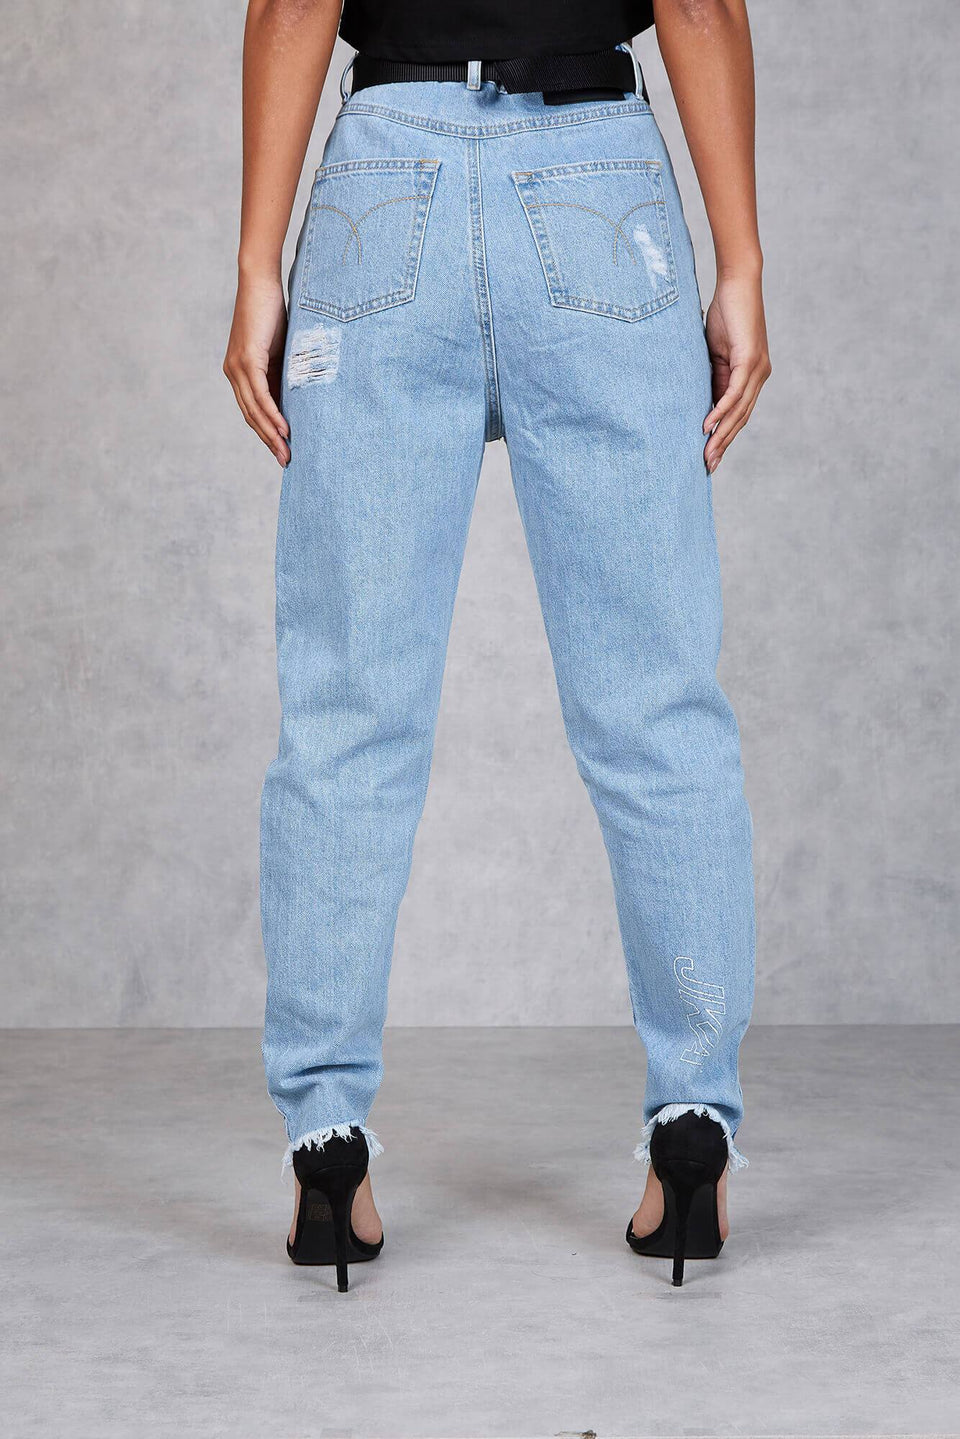 Beverley High Waisted Deconstructed Mom Jeans - Blue